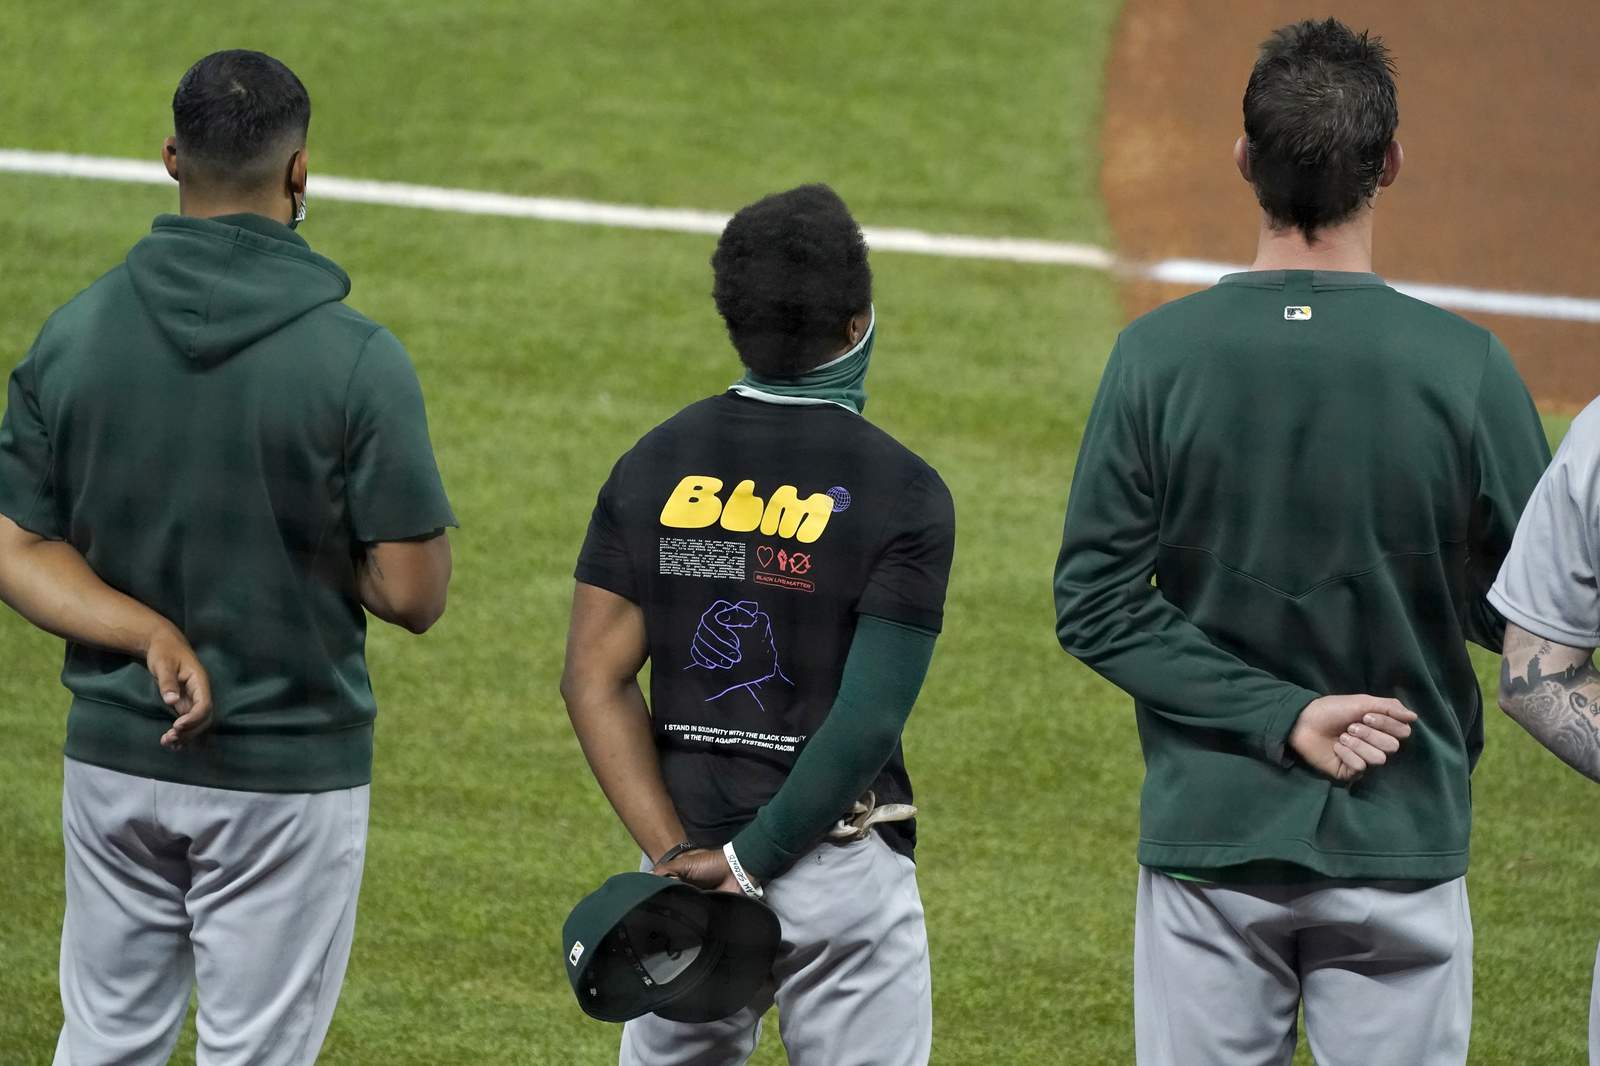 Awkward activism: MLB's uneven response to racial injustice